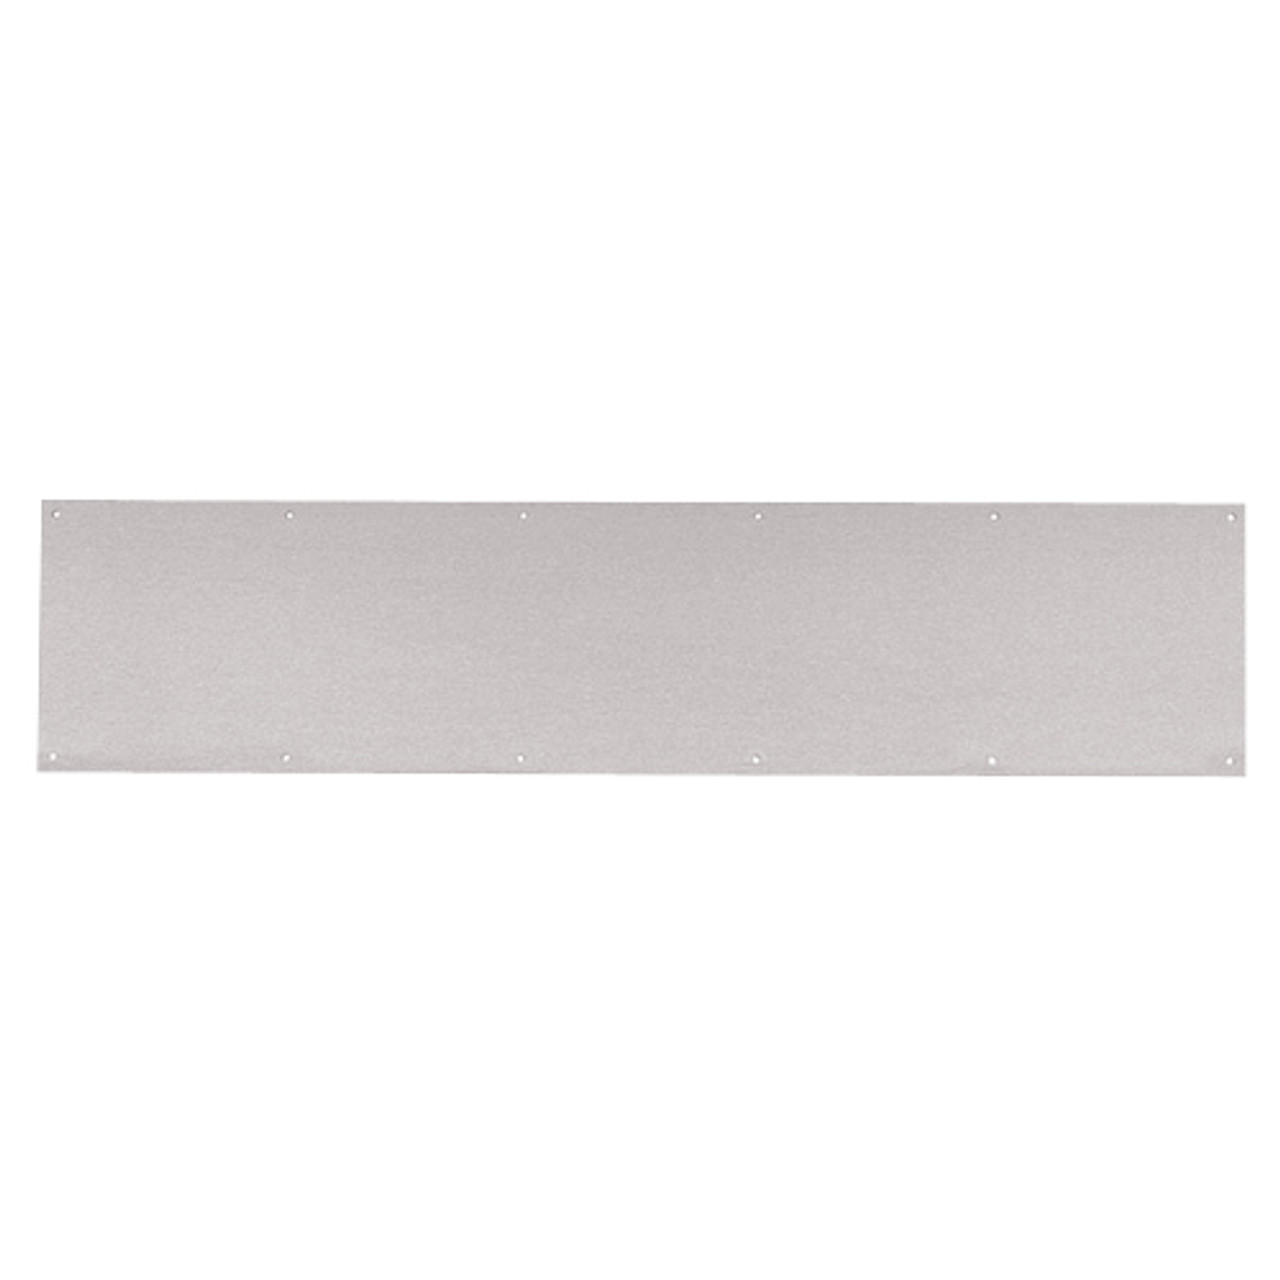 8400-US32D-46x34-B-CS Ives 8400 Series Protection Plate in Satin Stainless Steel